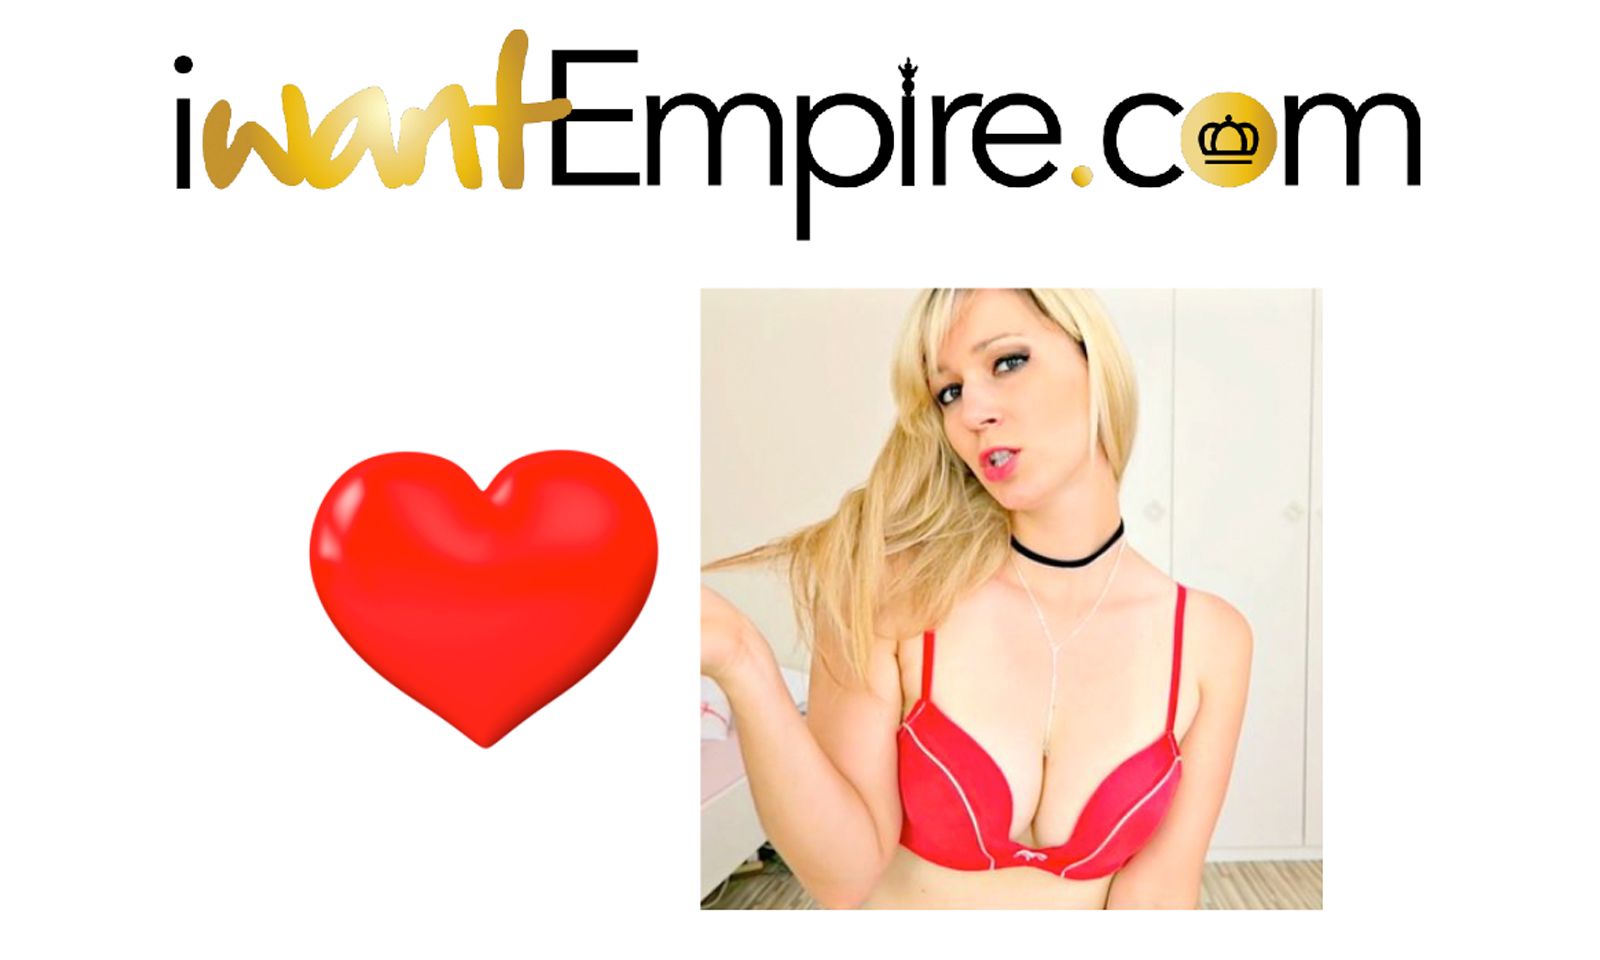 iWantEmpire Announces Valentine’s Day Contest Winners